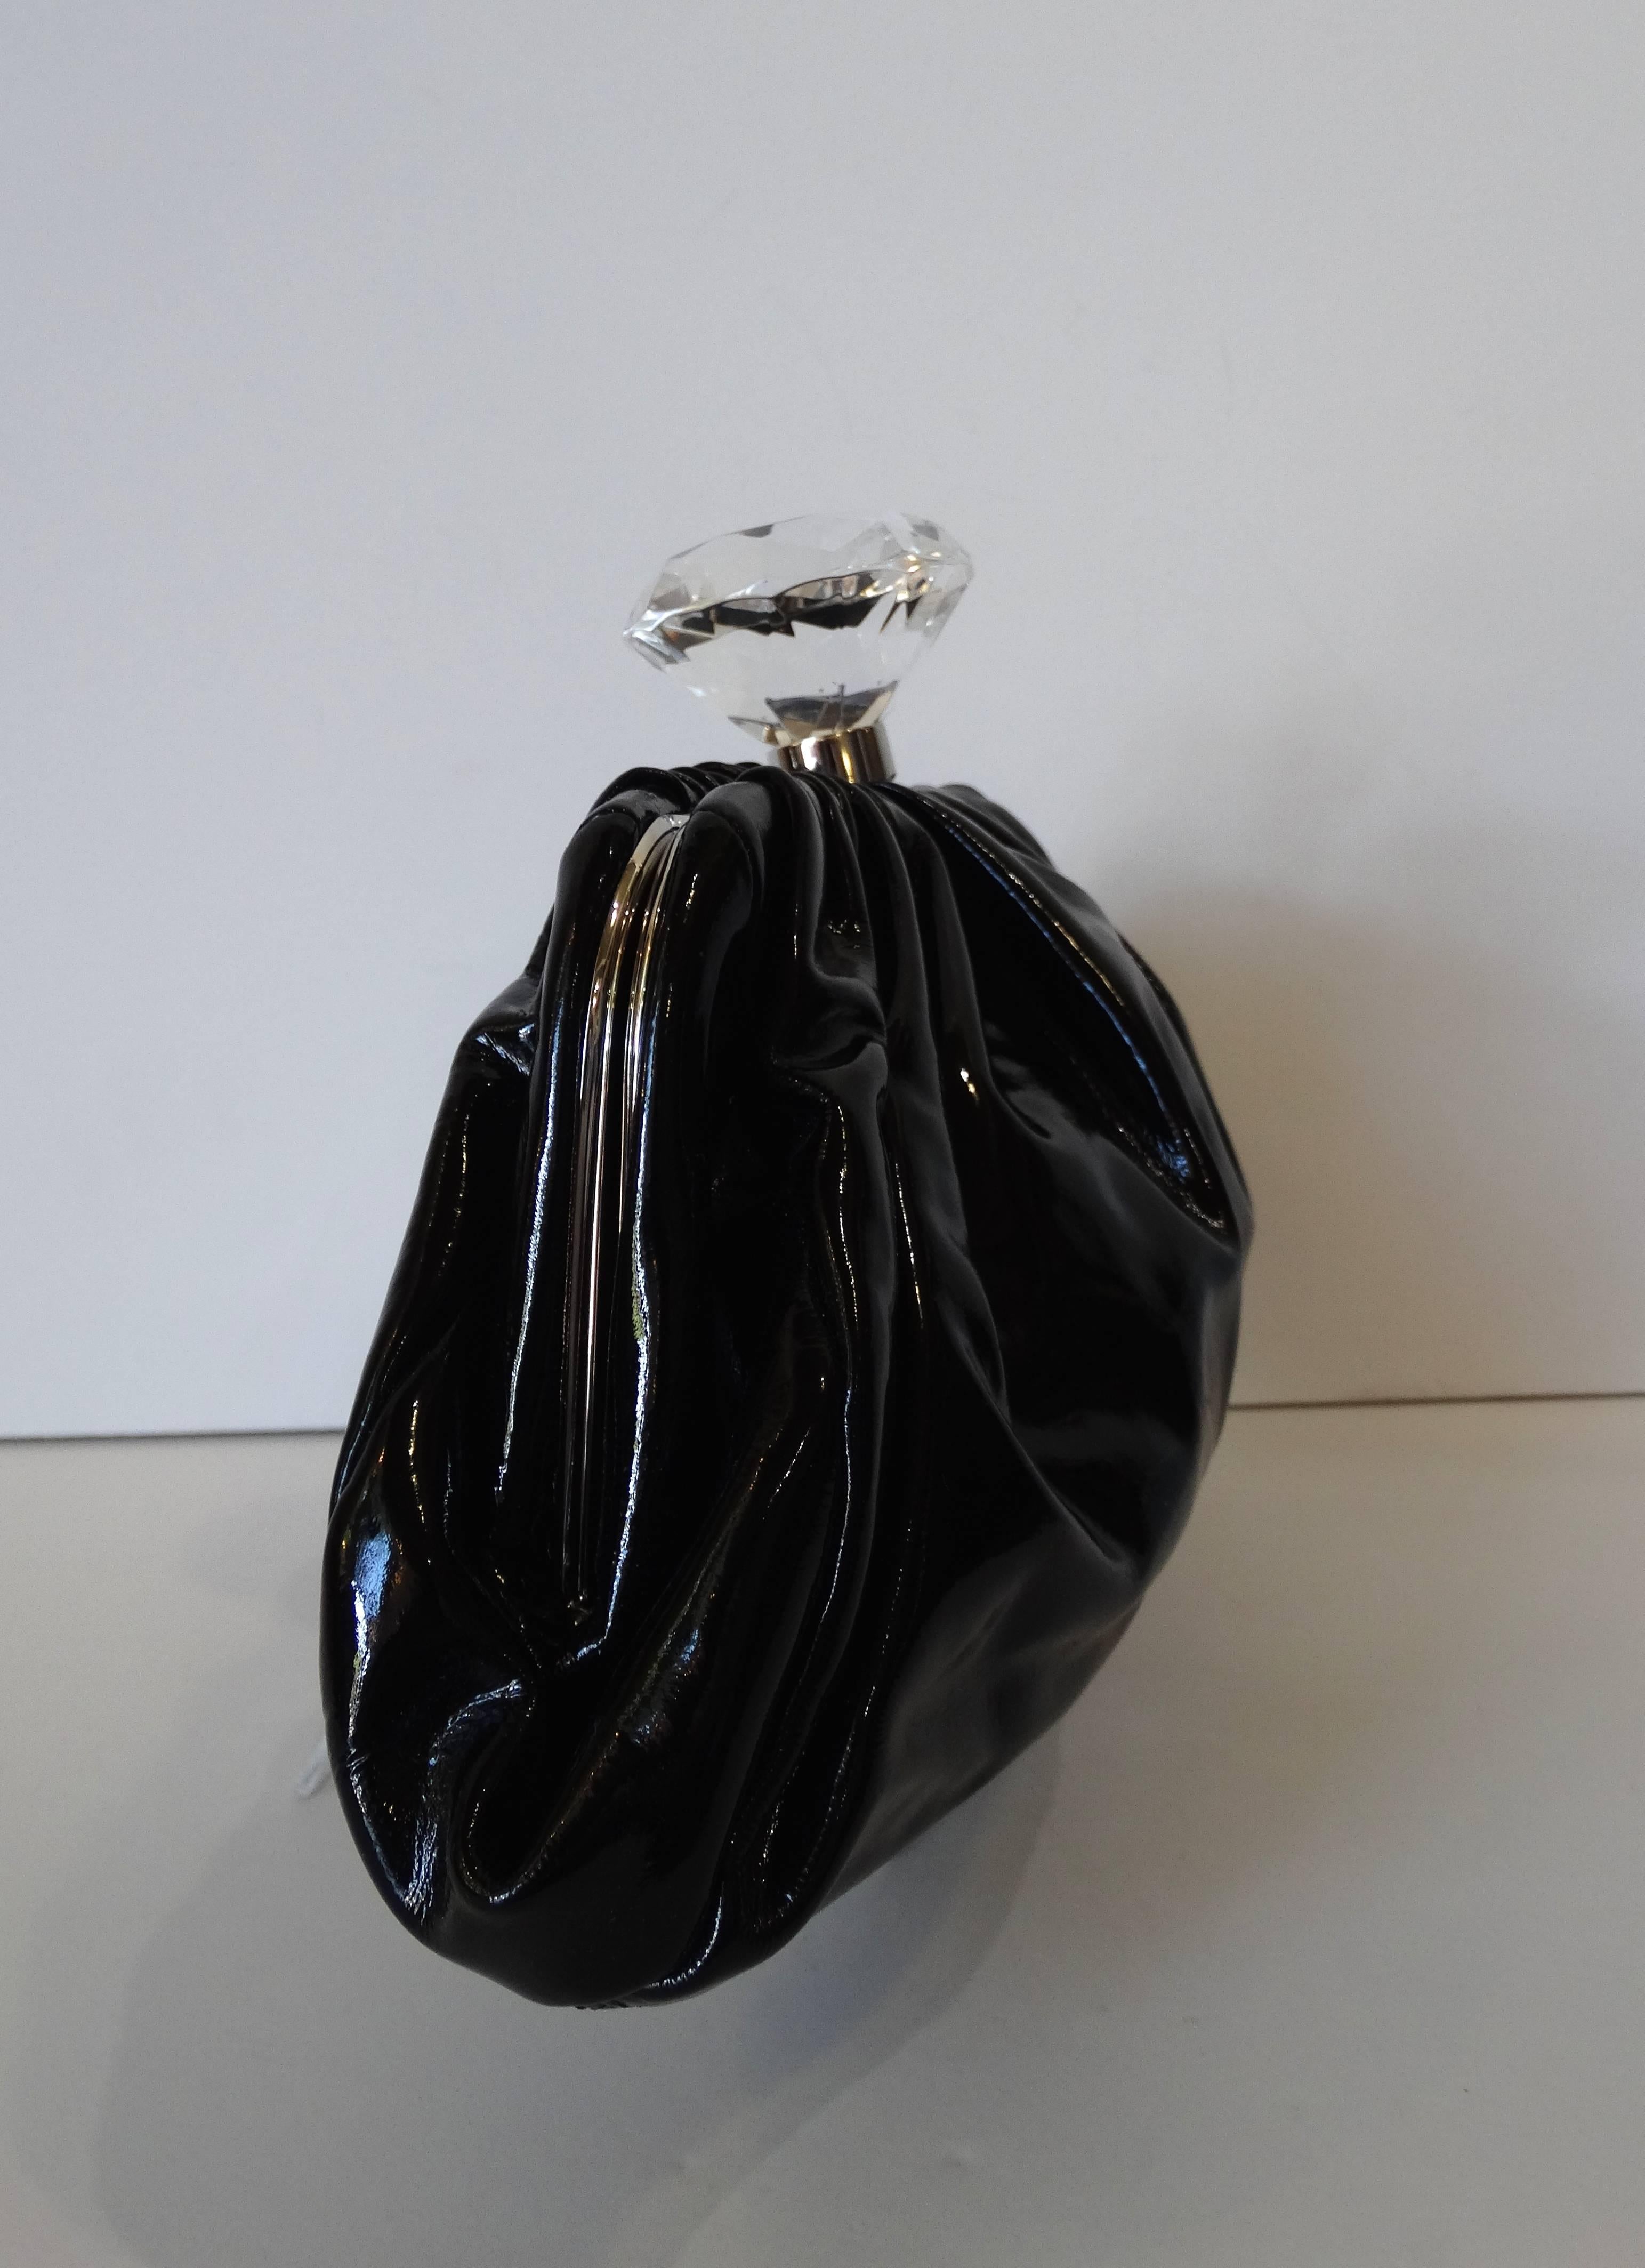 Forget the Hope diamond- we want Chanel diamonds! This incredible clutch comes a soft and shiny black patent leather- accented with silver hardware and of course: an oversized lucite diamond with CC logo inside. Push lock closure at the top. Fully